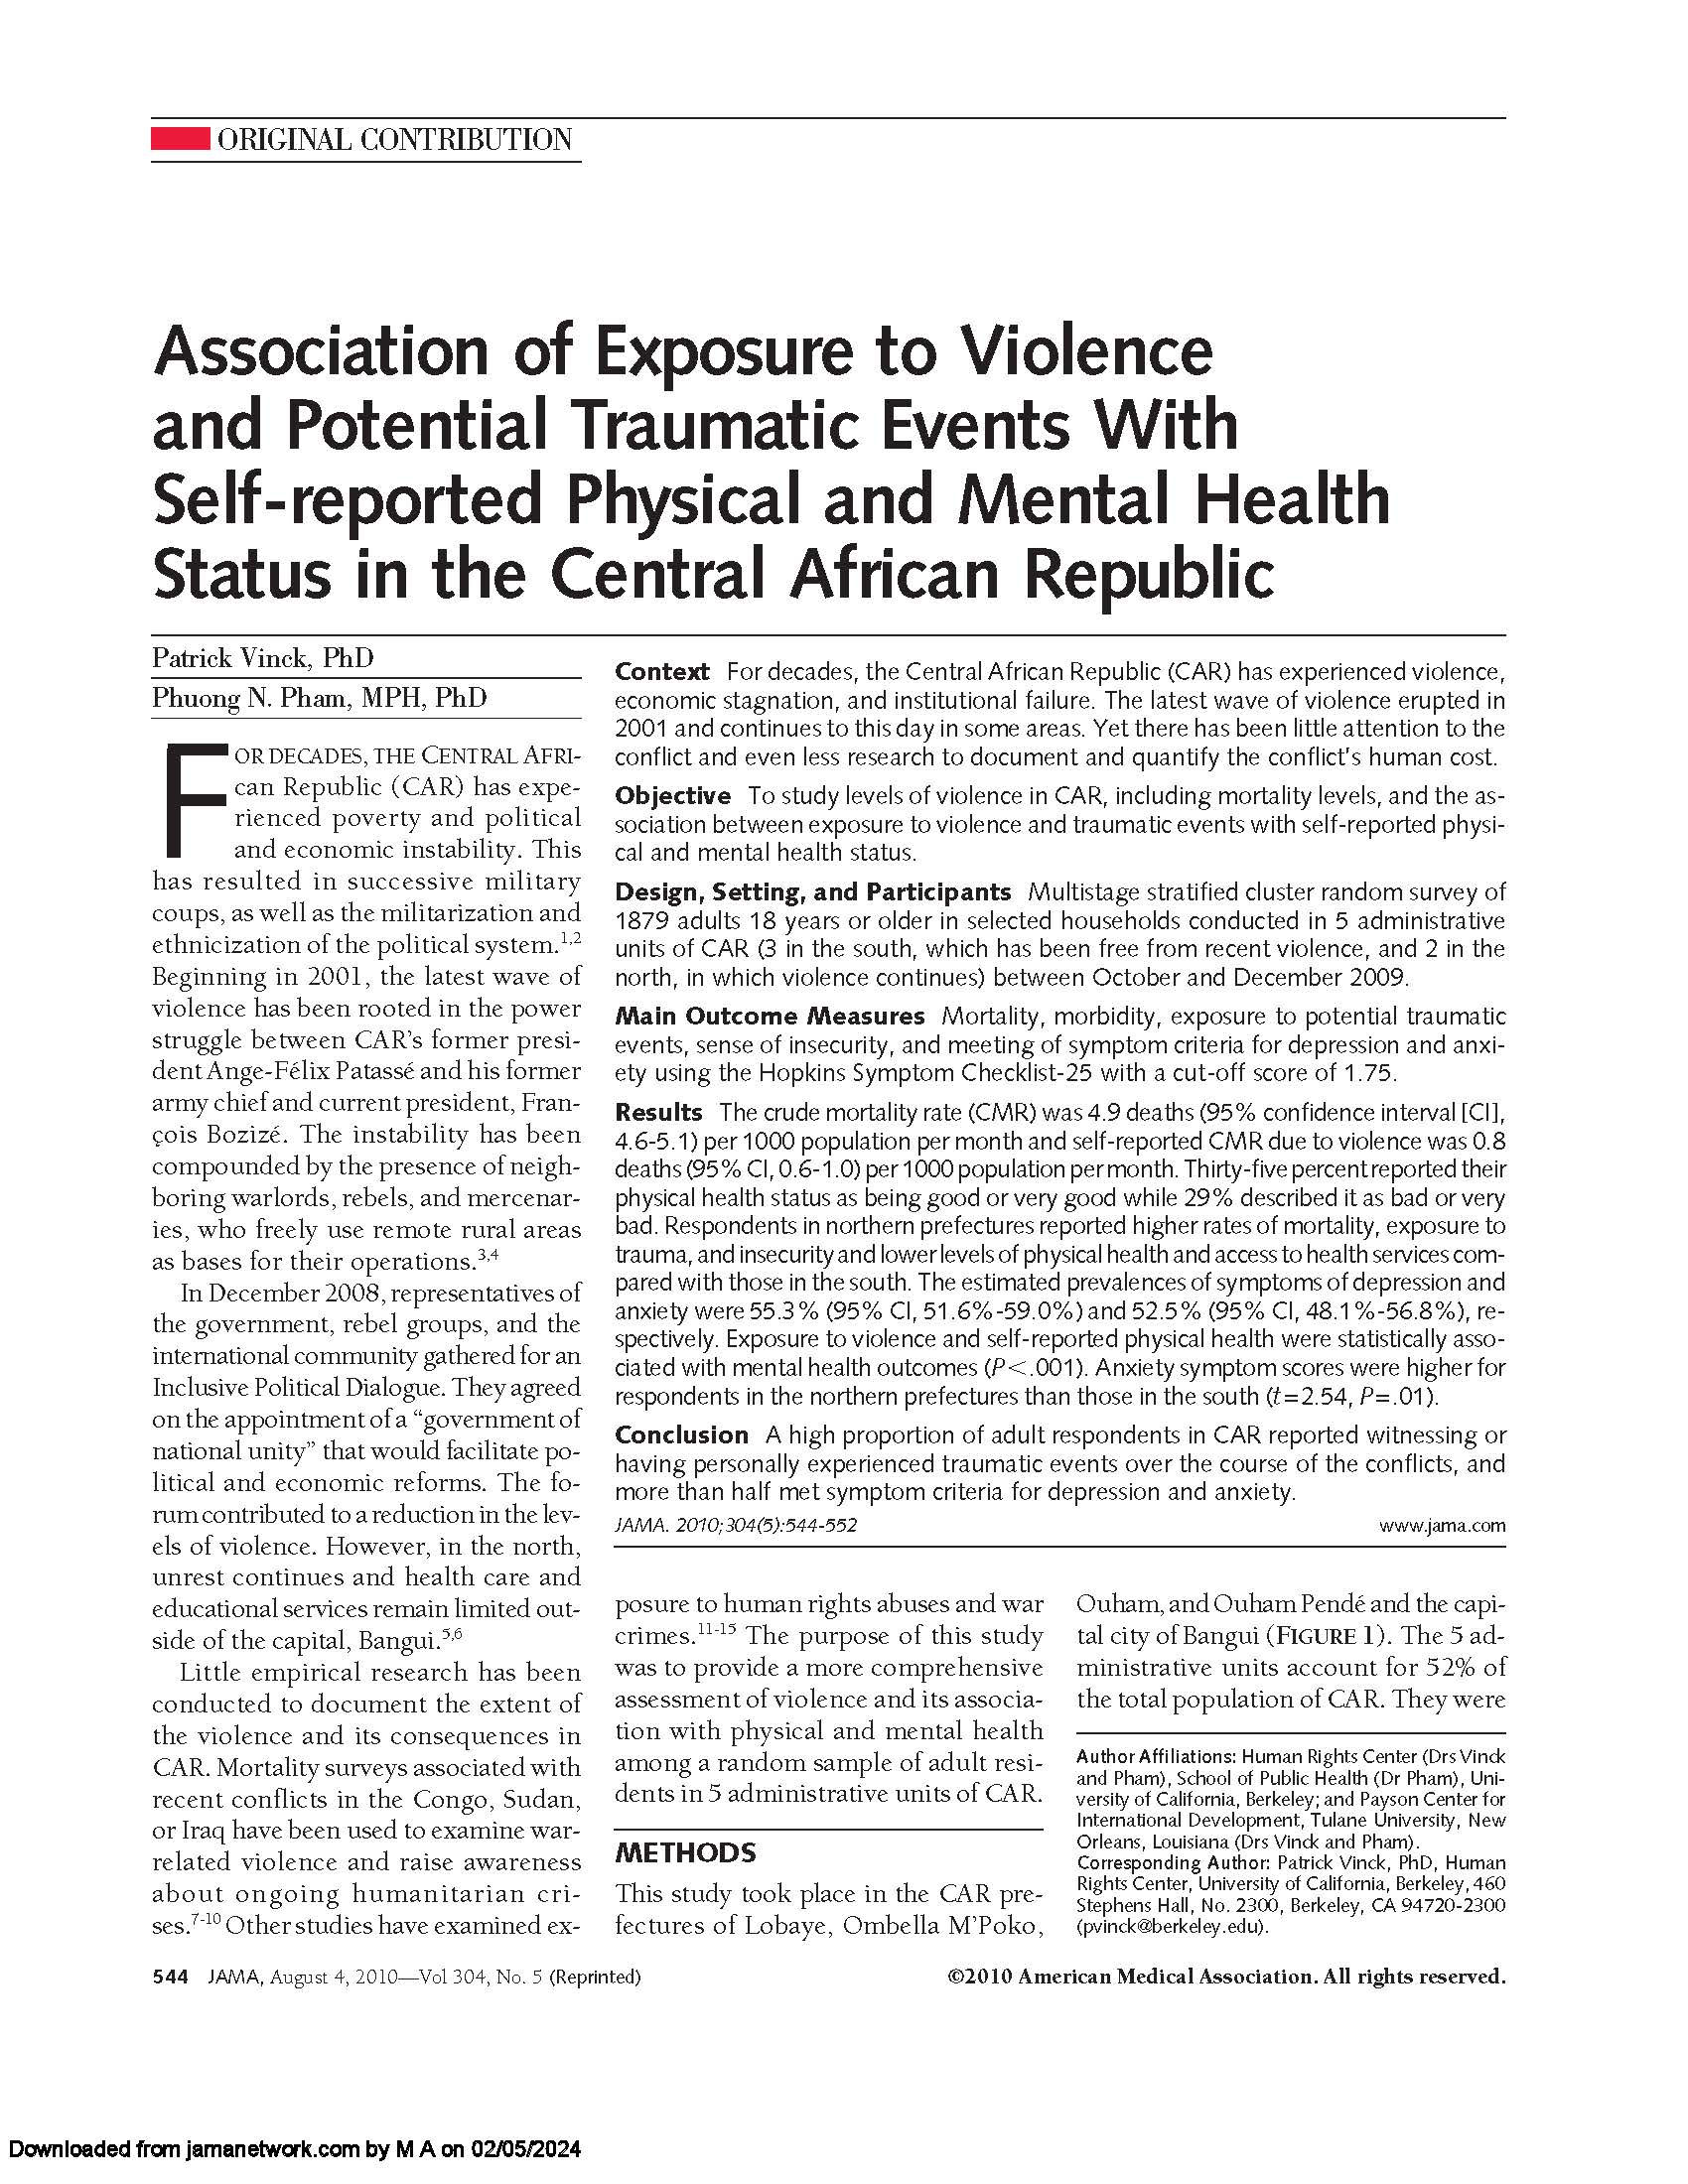 Pages from Association of Exposure to Violence and Potential Traumatic Events With Self-reported Physical and Mental Health Status in the Central African Republic